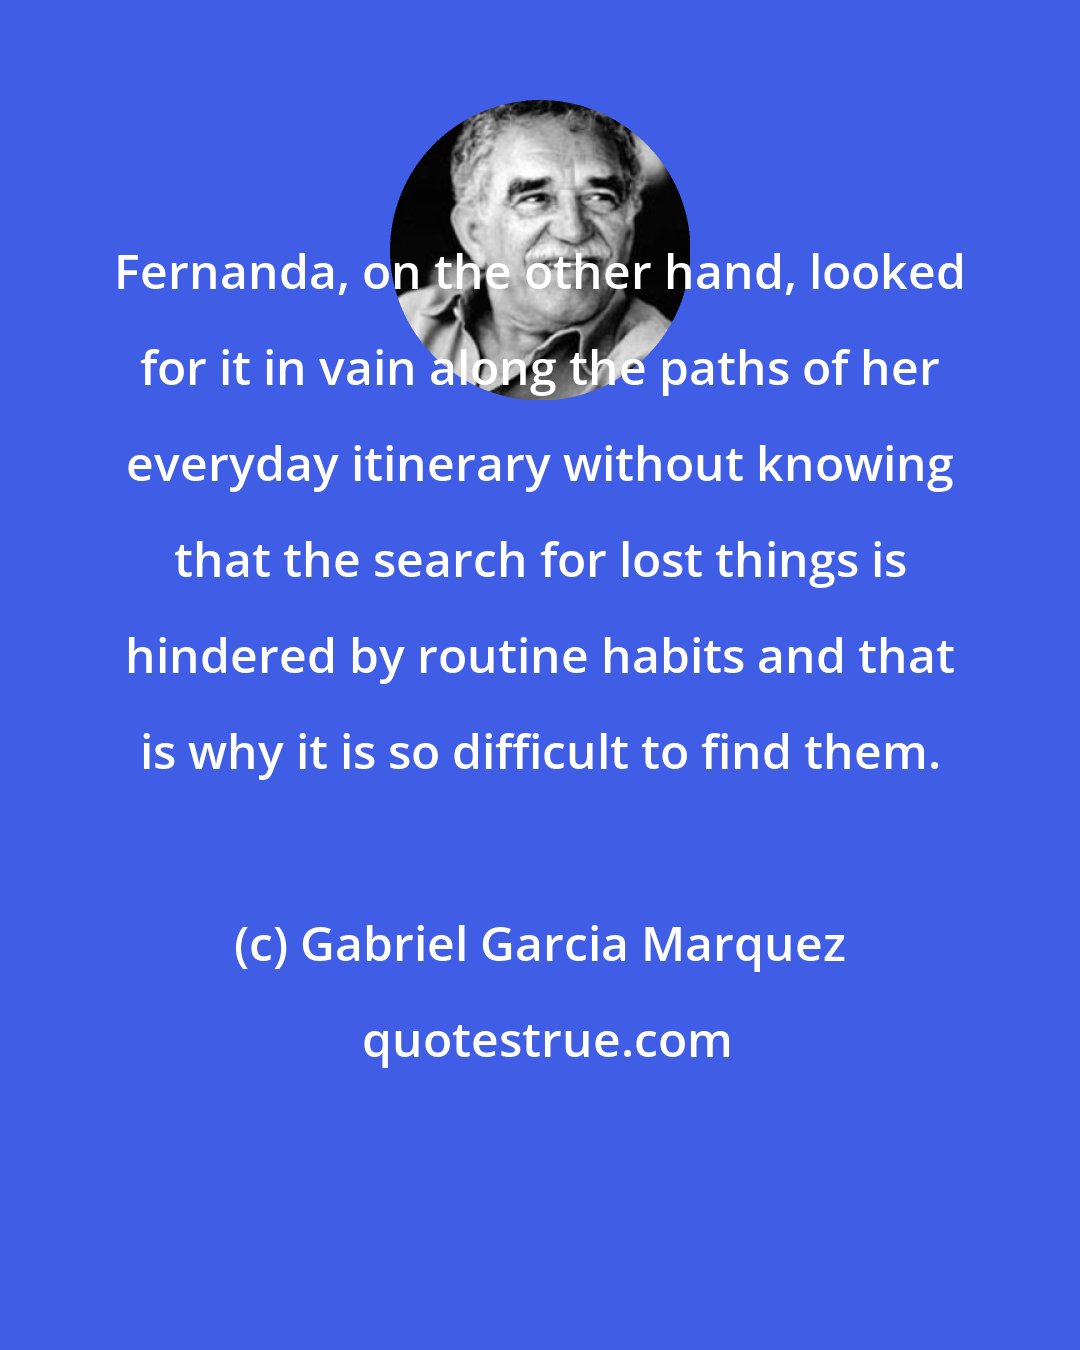 Gabriel Garcia Marquez: Fernanda, on the other hand, looked for it in vain along the paths of her everyday itinerary without knowing that the search for lost things is hindered by routine habits and that is why it is so difficult to find them.